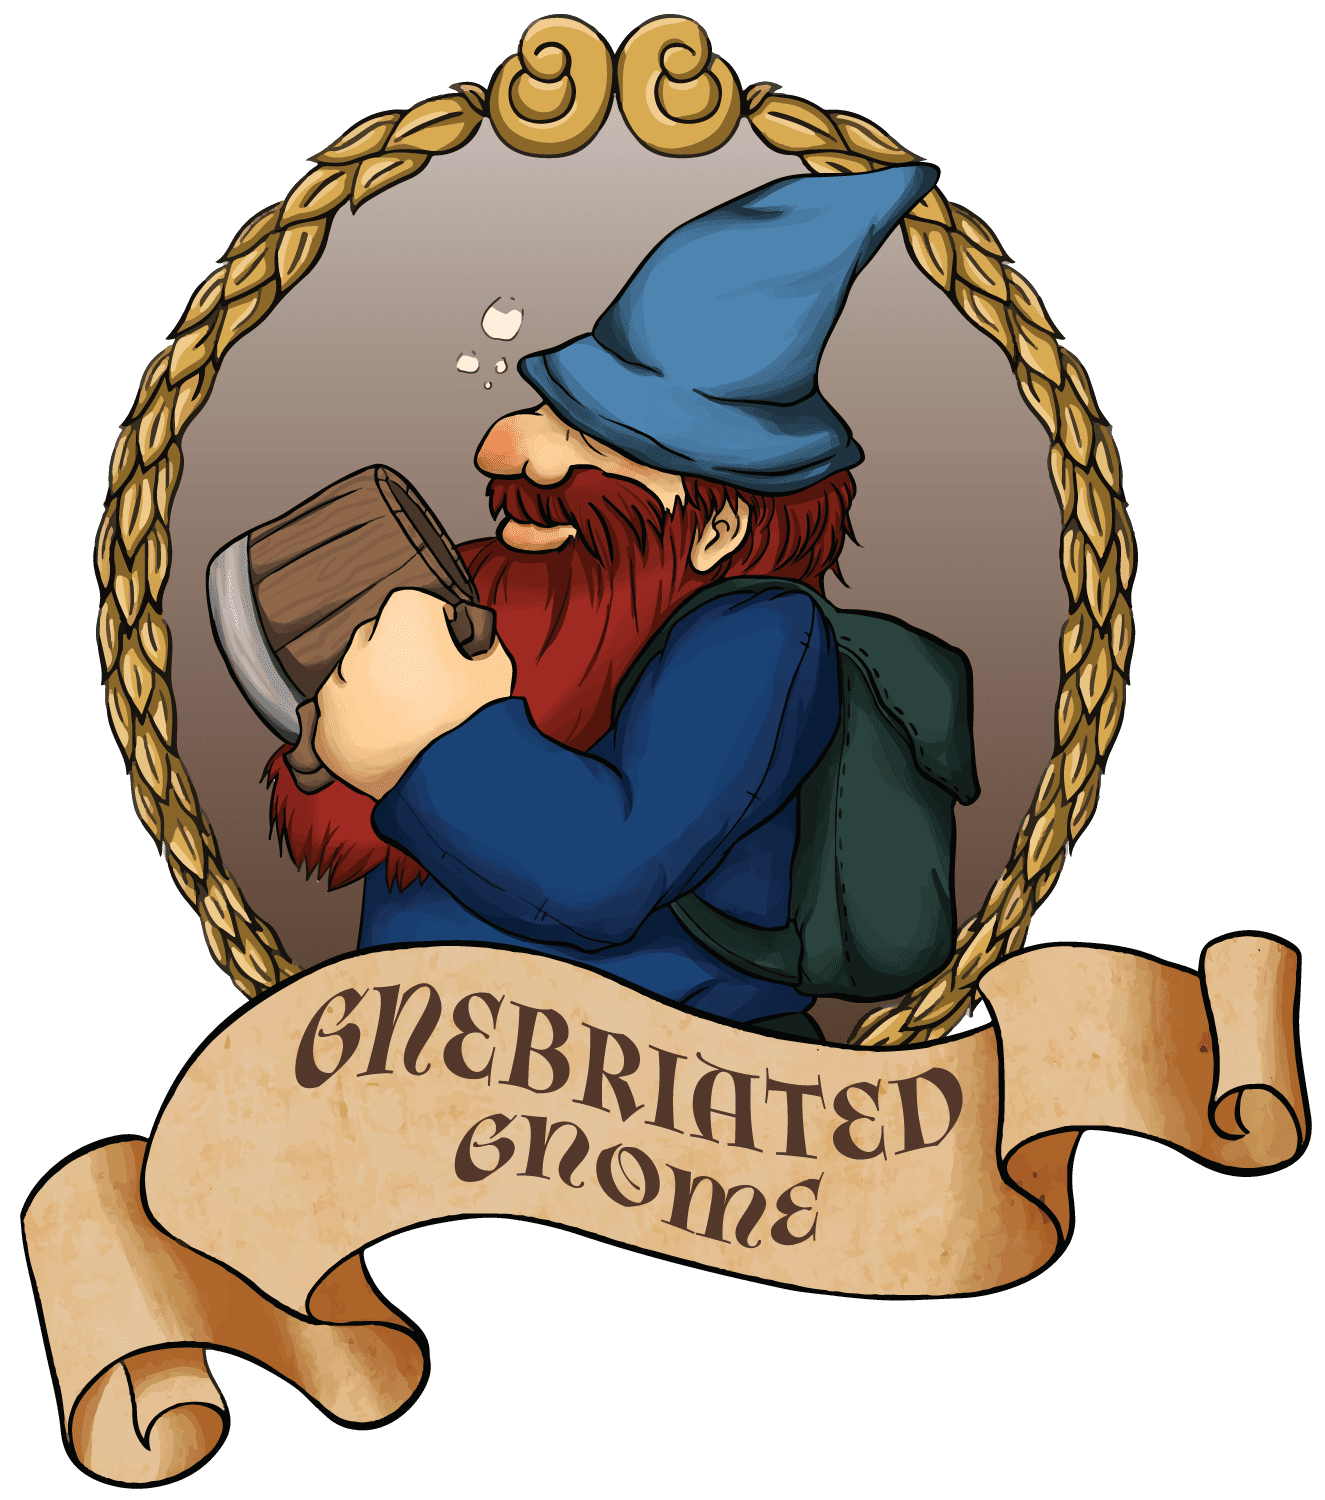 Official-Gnebriated-Gnome-Logo-LARGE